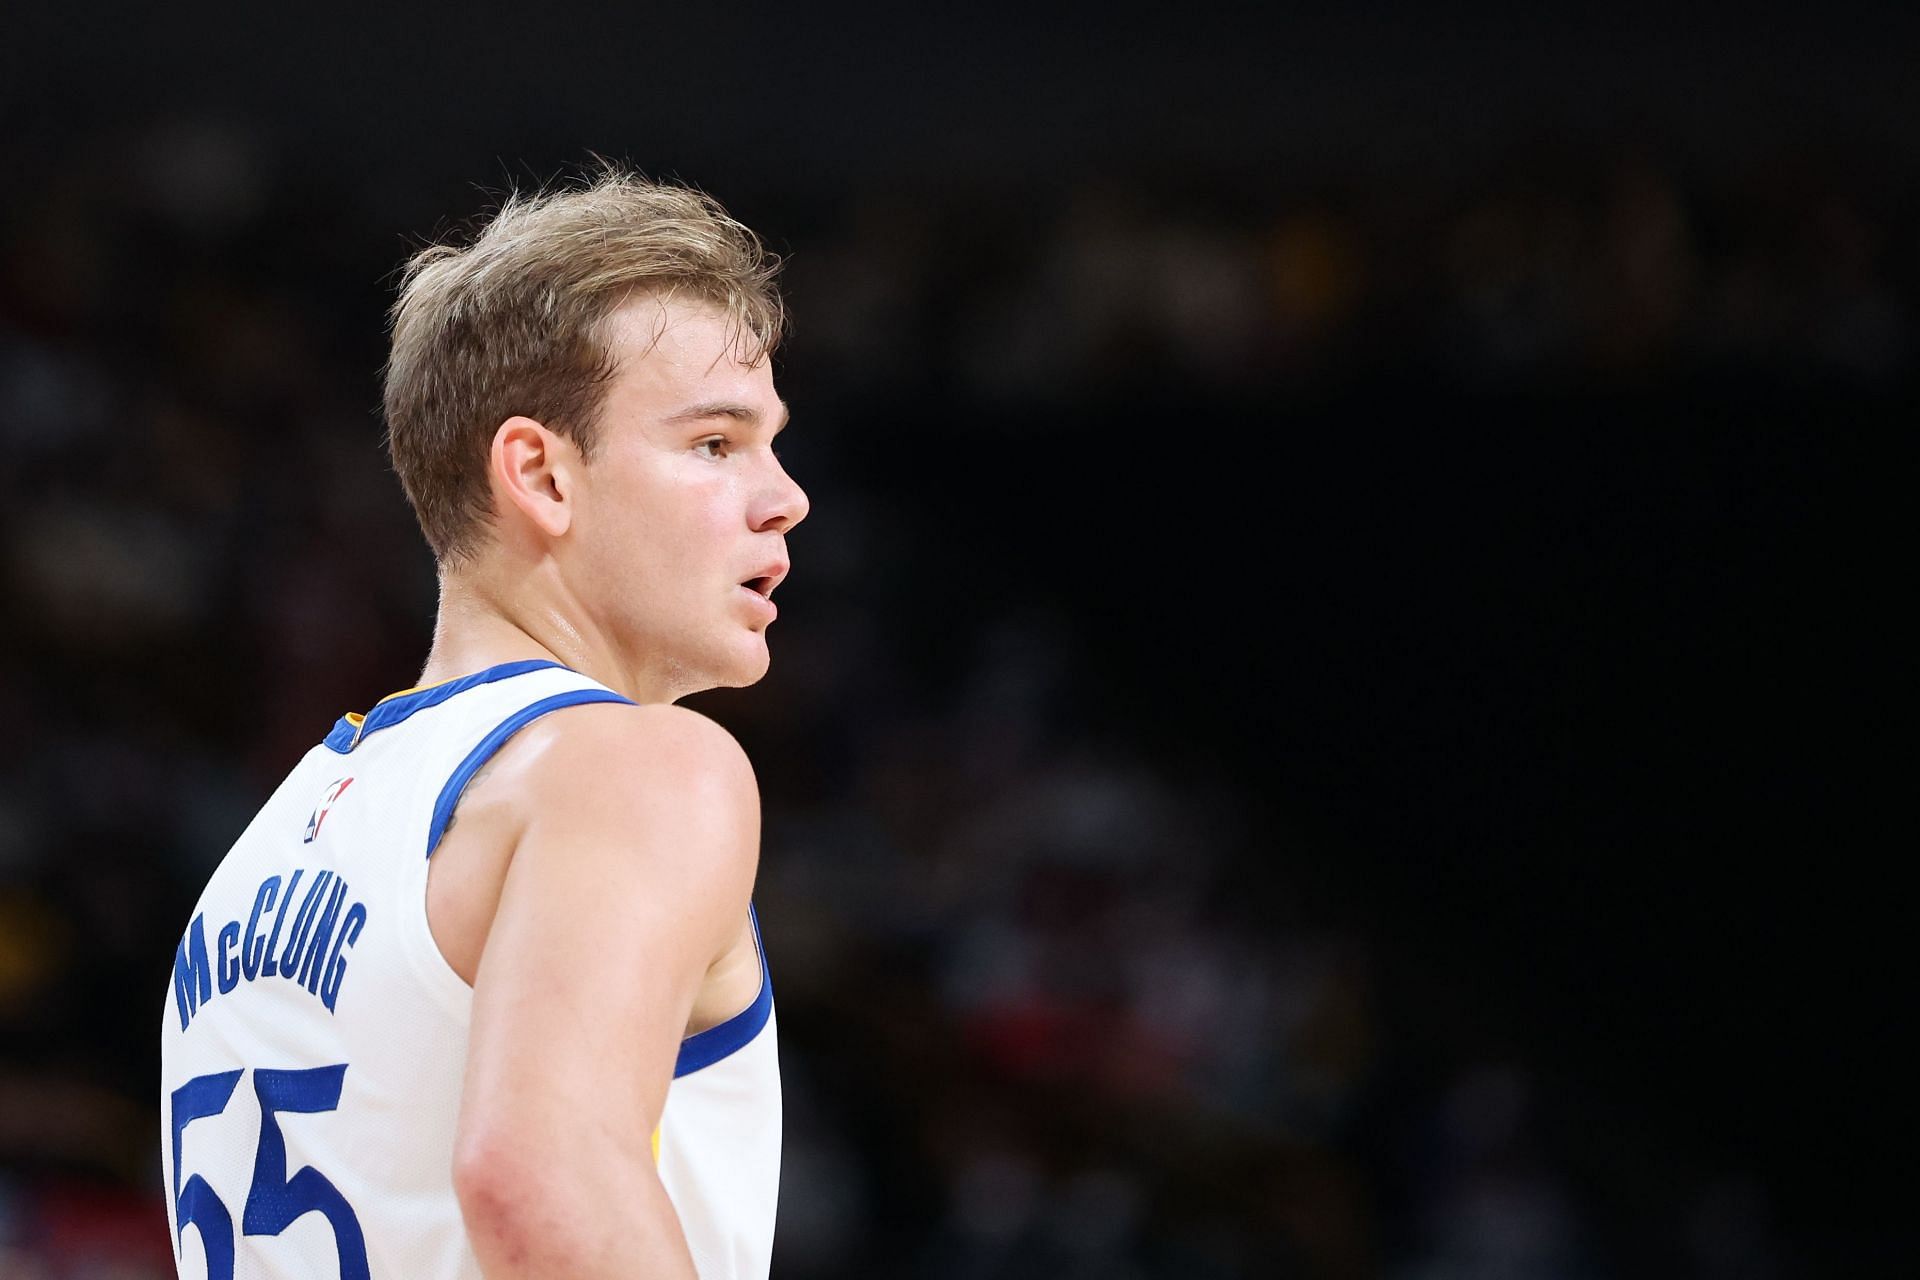 Mac McClung is set to depart the Golden State Warriors